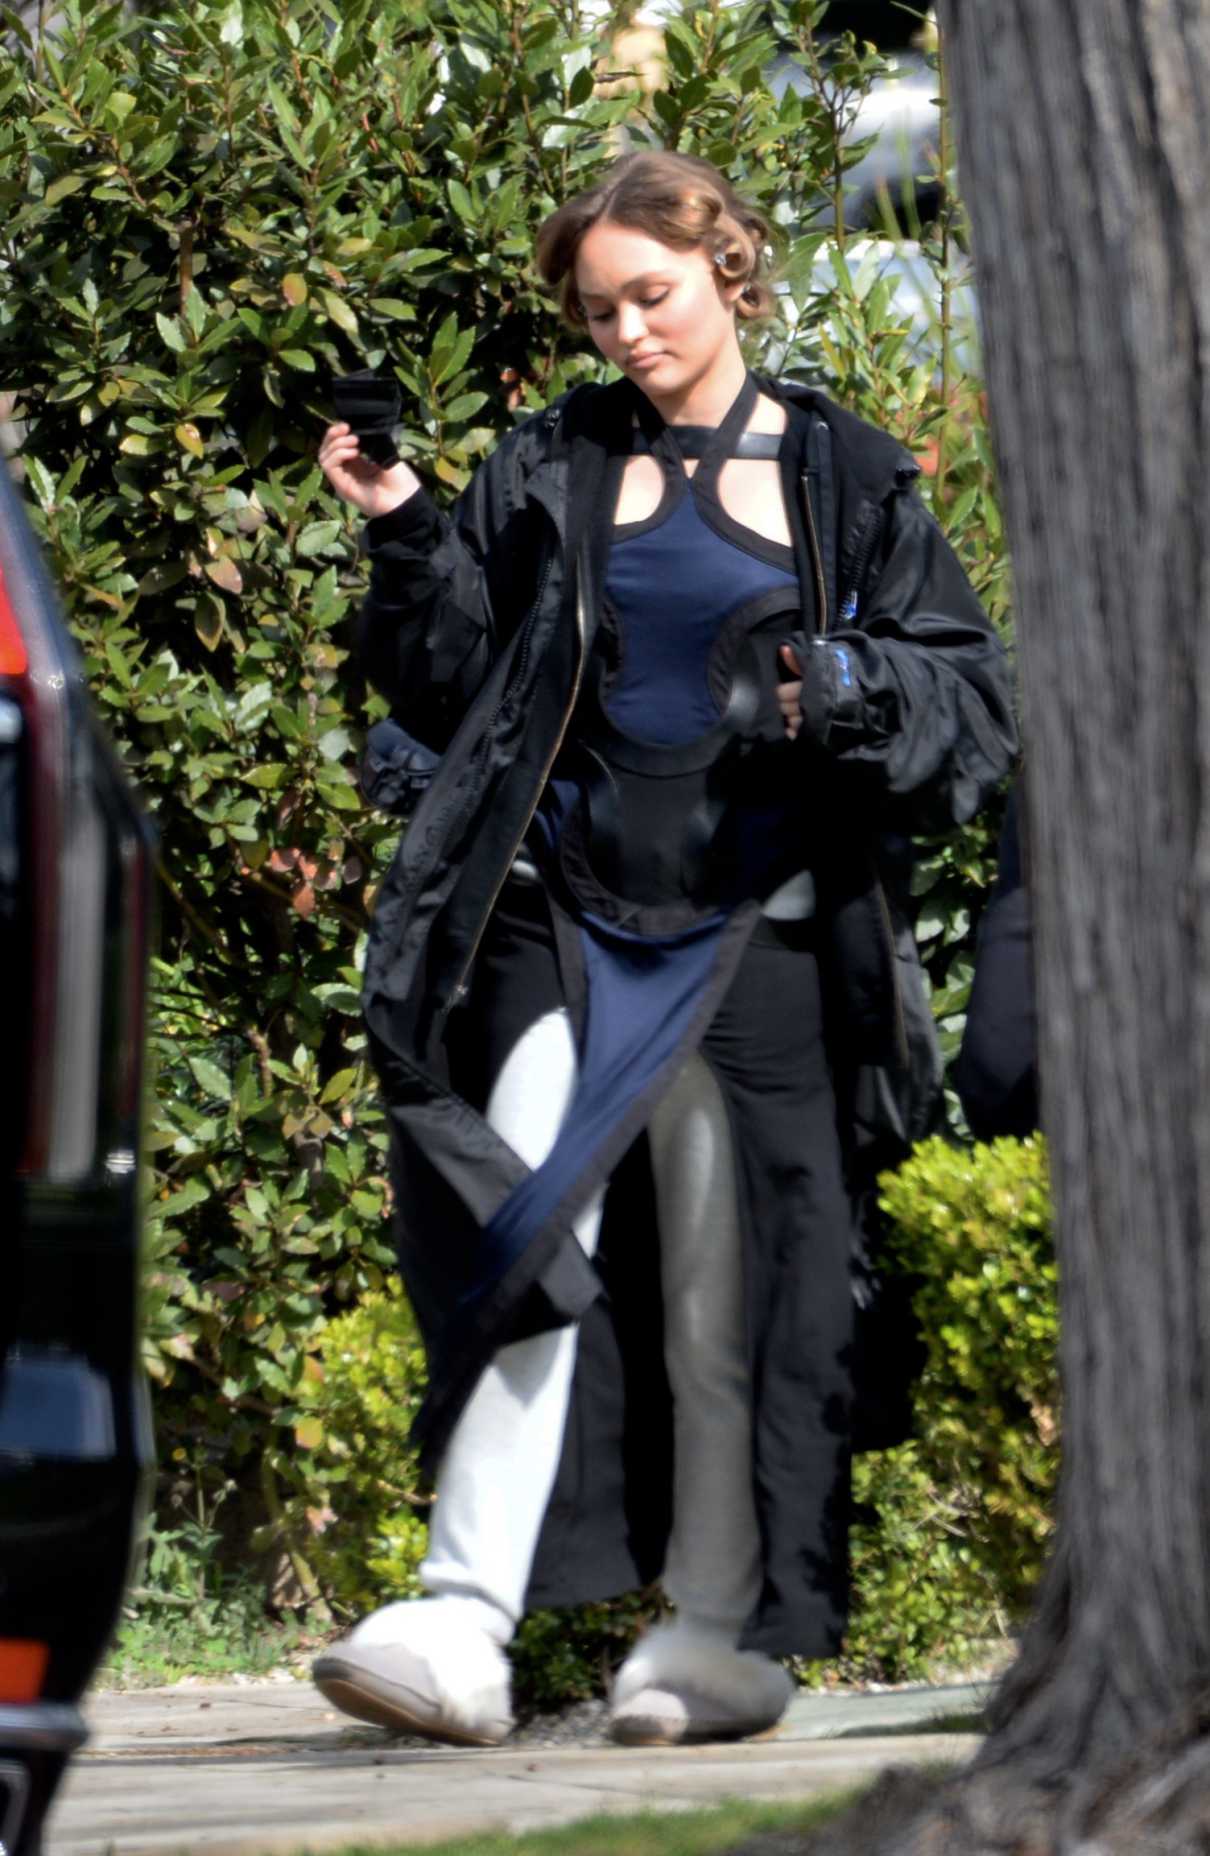 Lily-Rose Depp in a Black Outfit